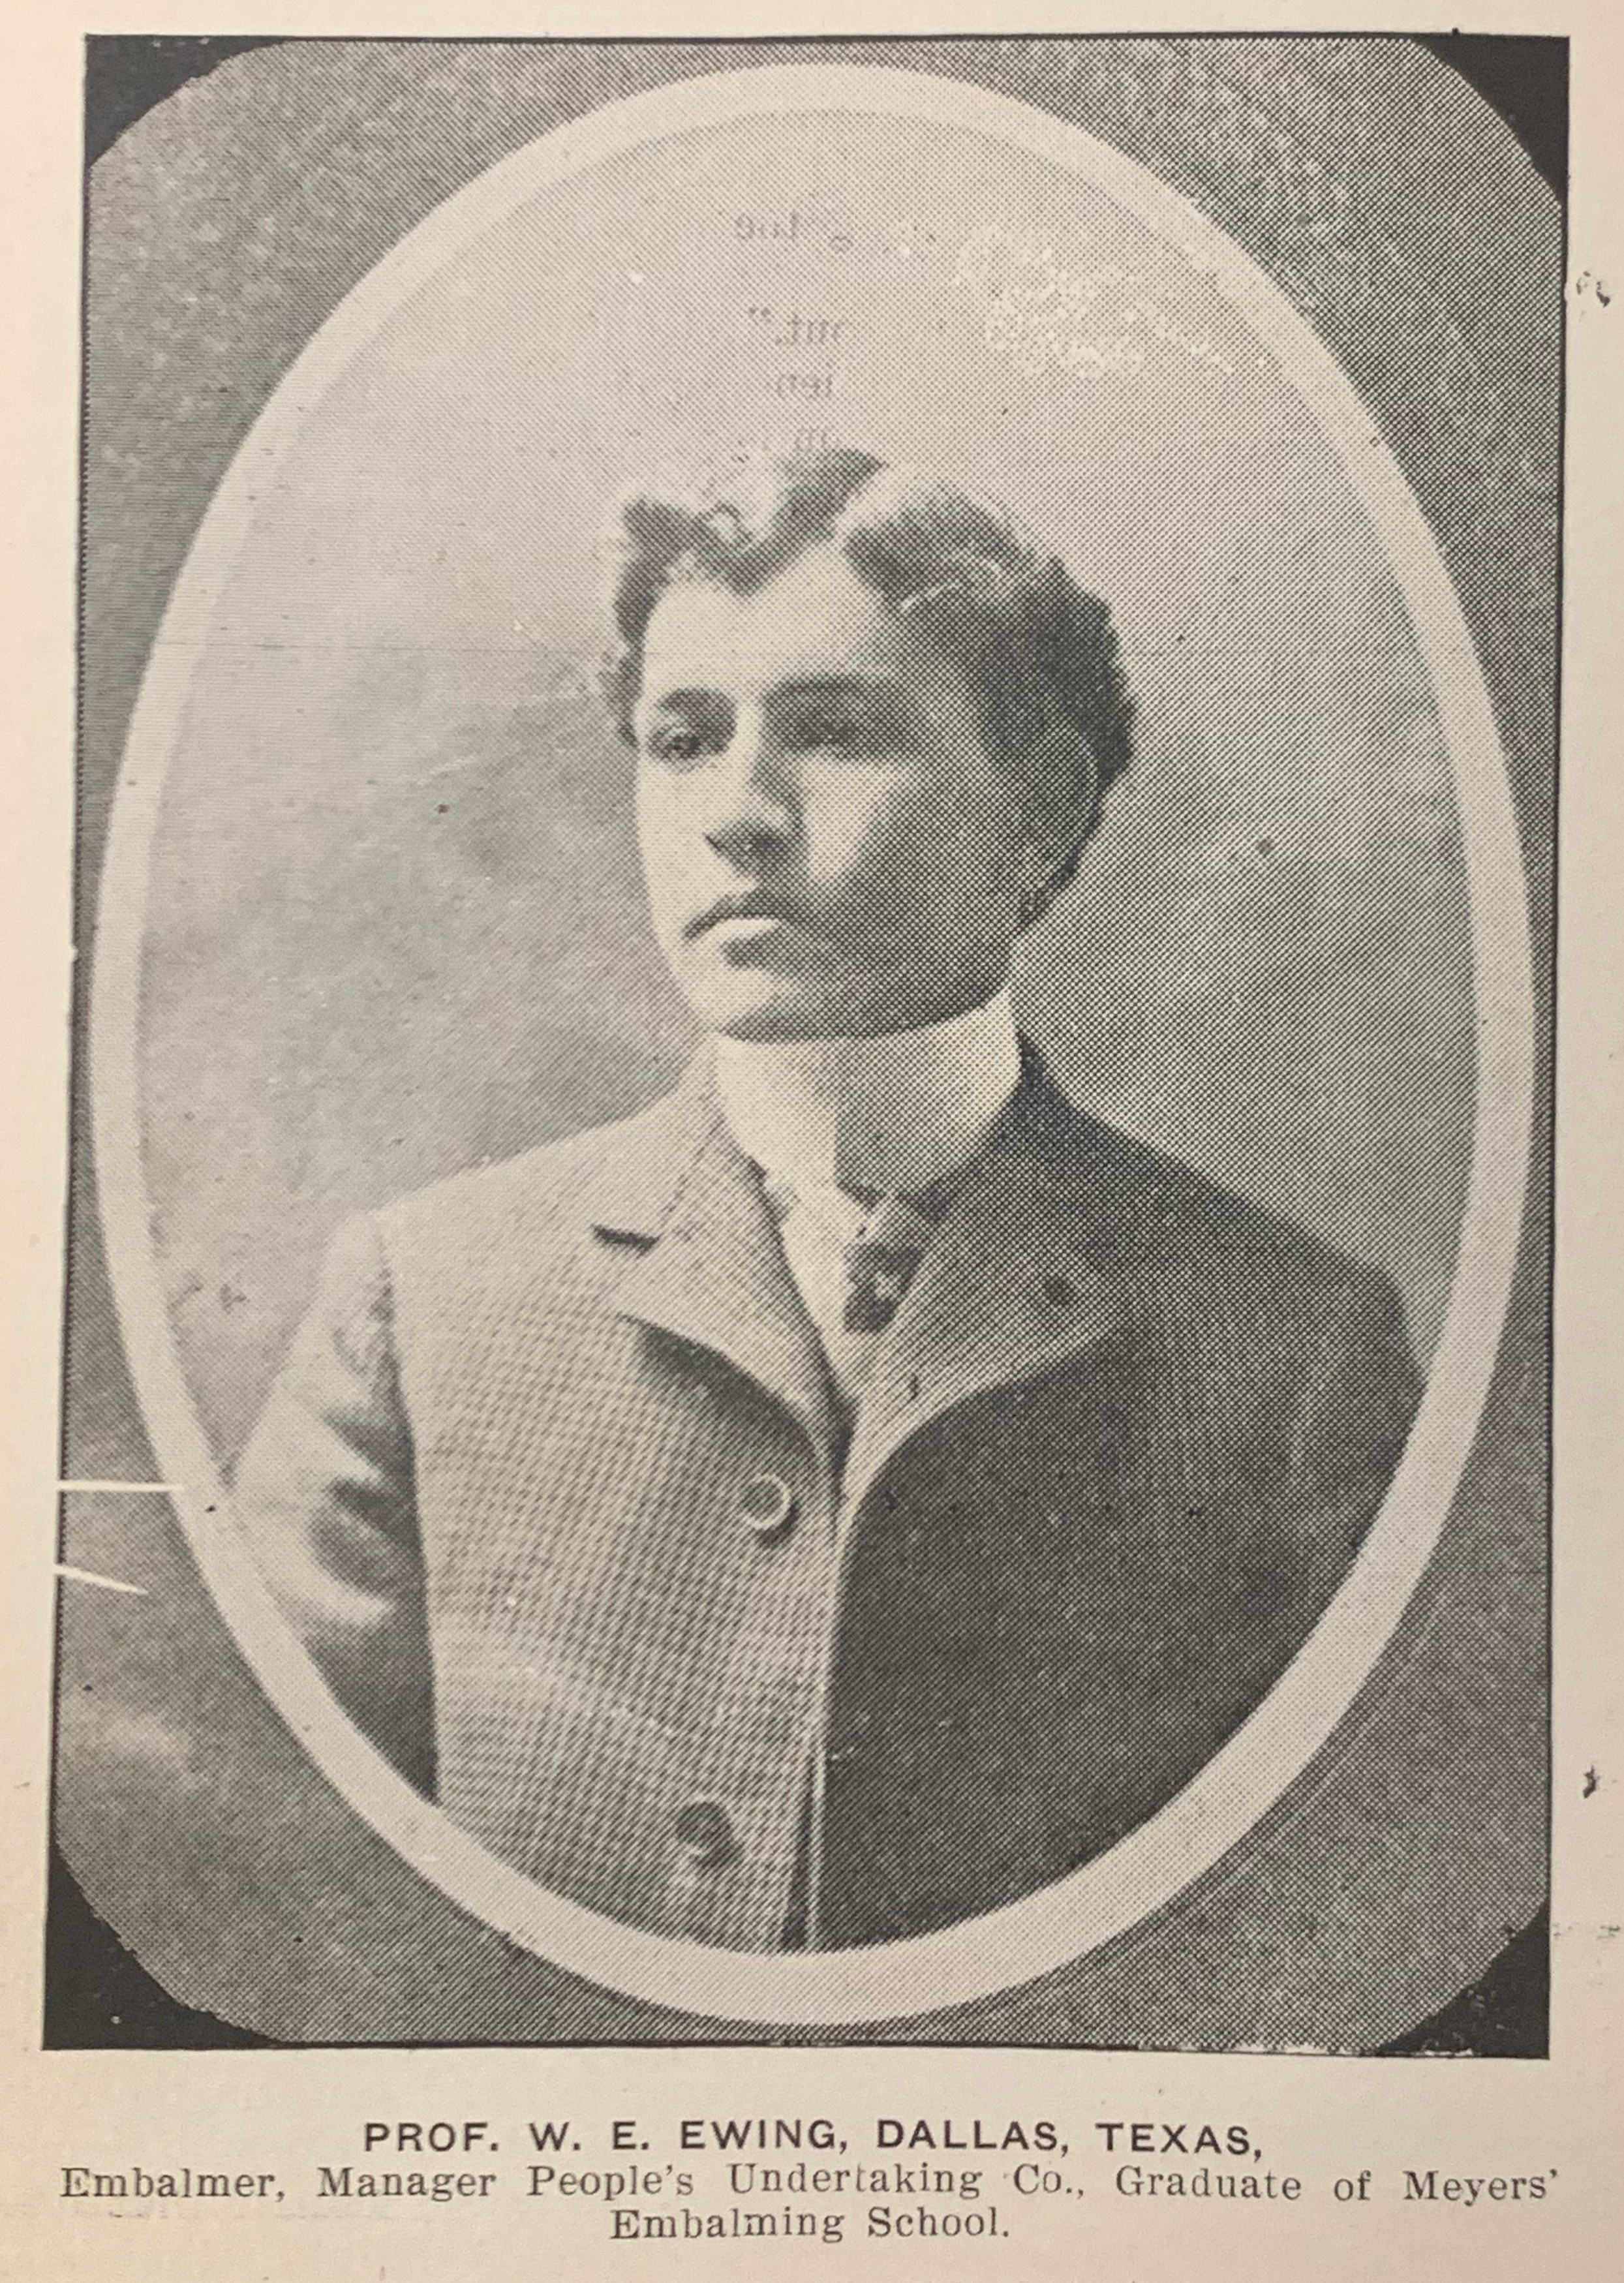 African-American man in a suit, 1900's. Text reads: Prof. W. E. Ewing, Dallas, Texas, Embalmer, Manager People's Undertaking Co., Graduate pf Meyer's Embalming School